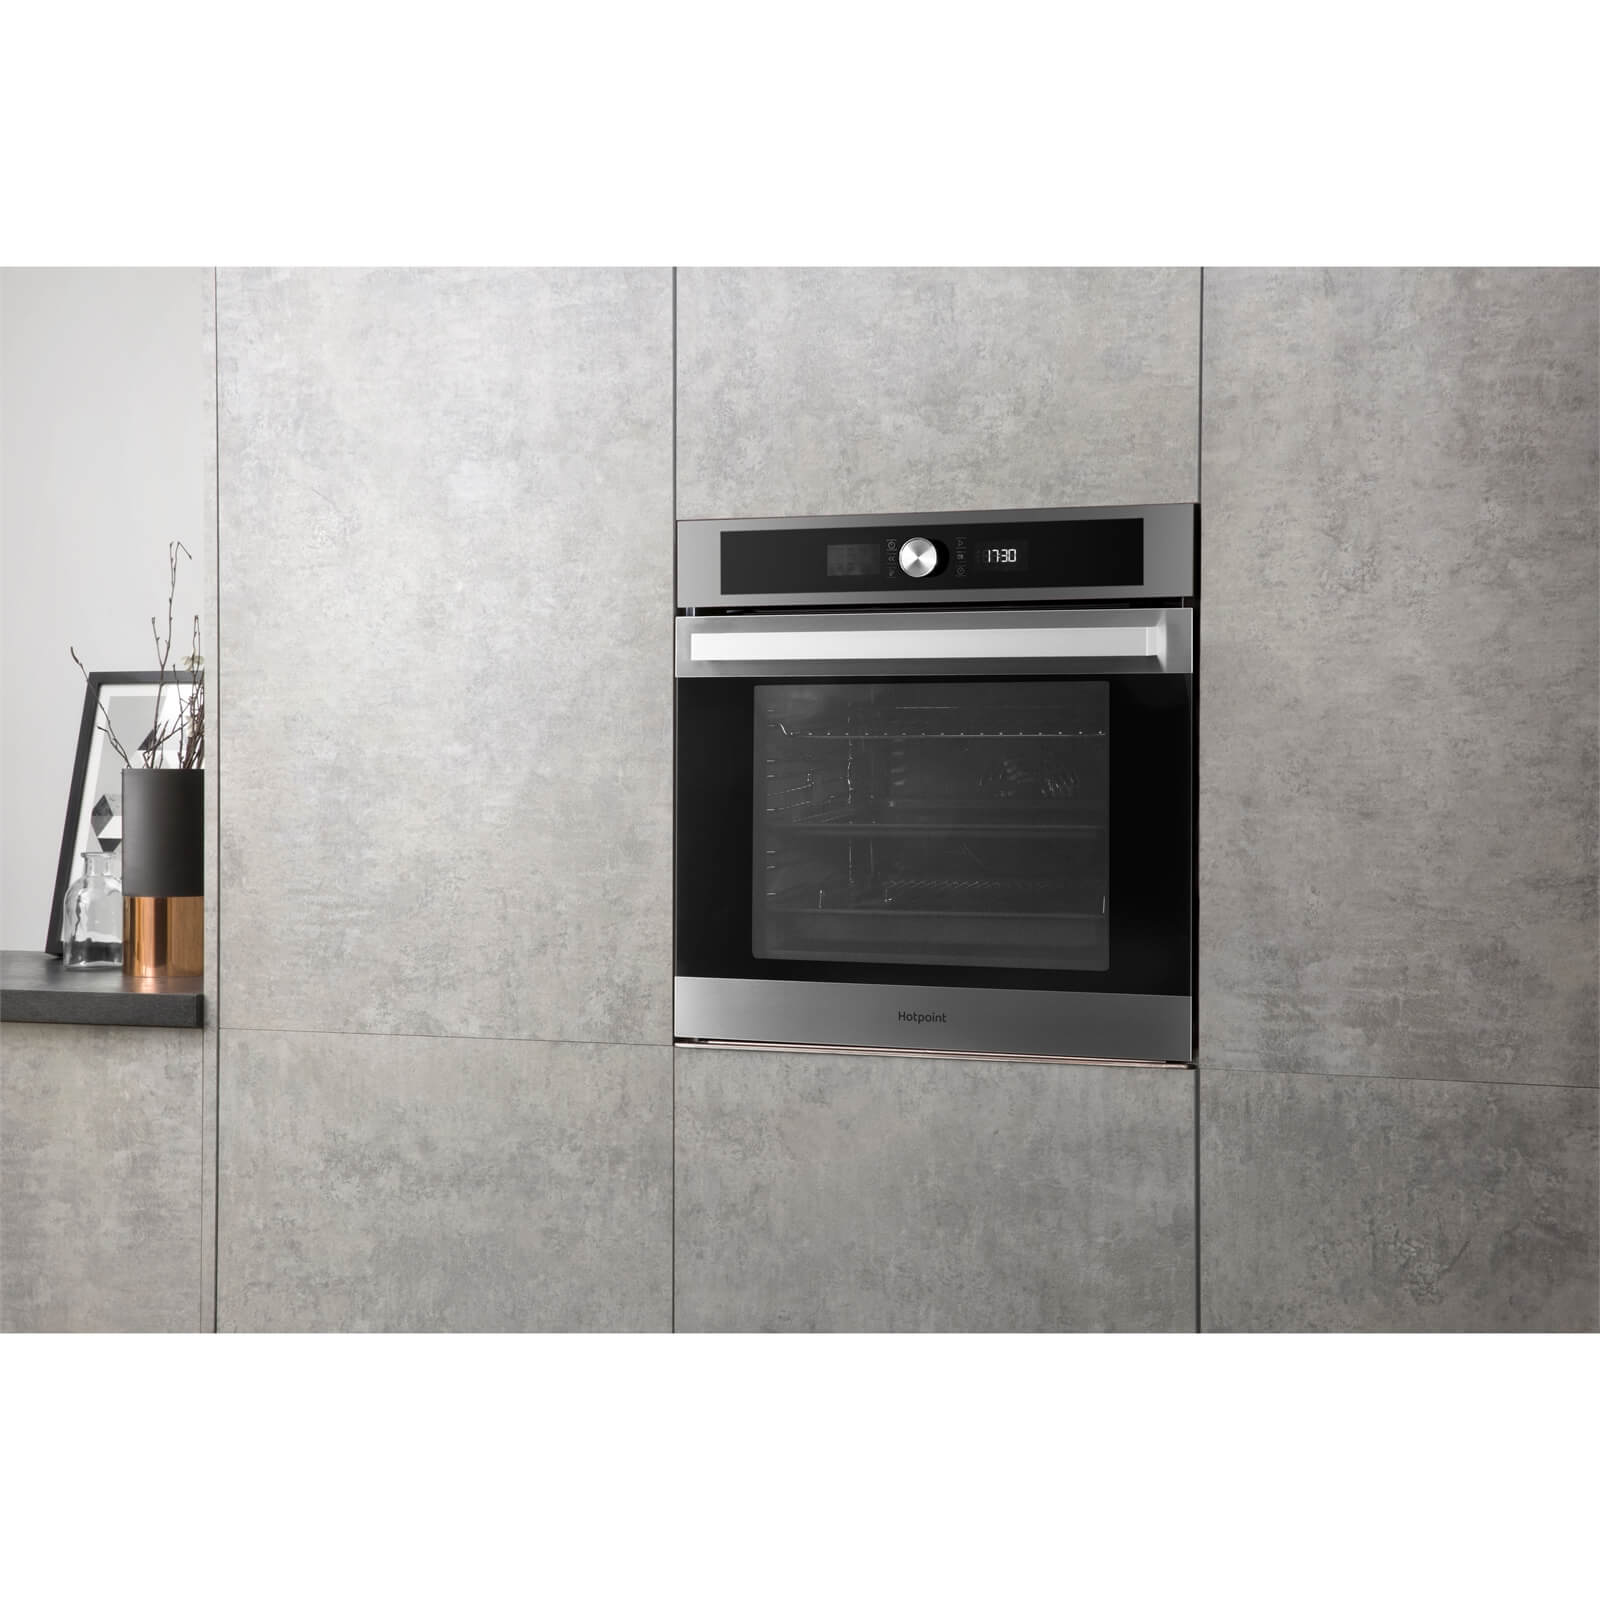 Hotpoint Class 5 SI5 851 H IX Built-in Oven - Stainless Steel